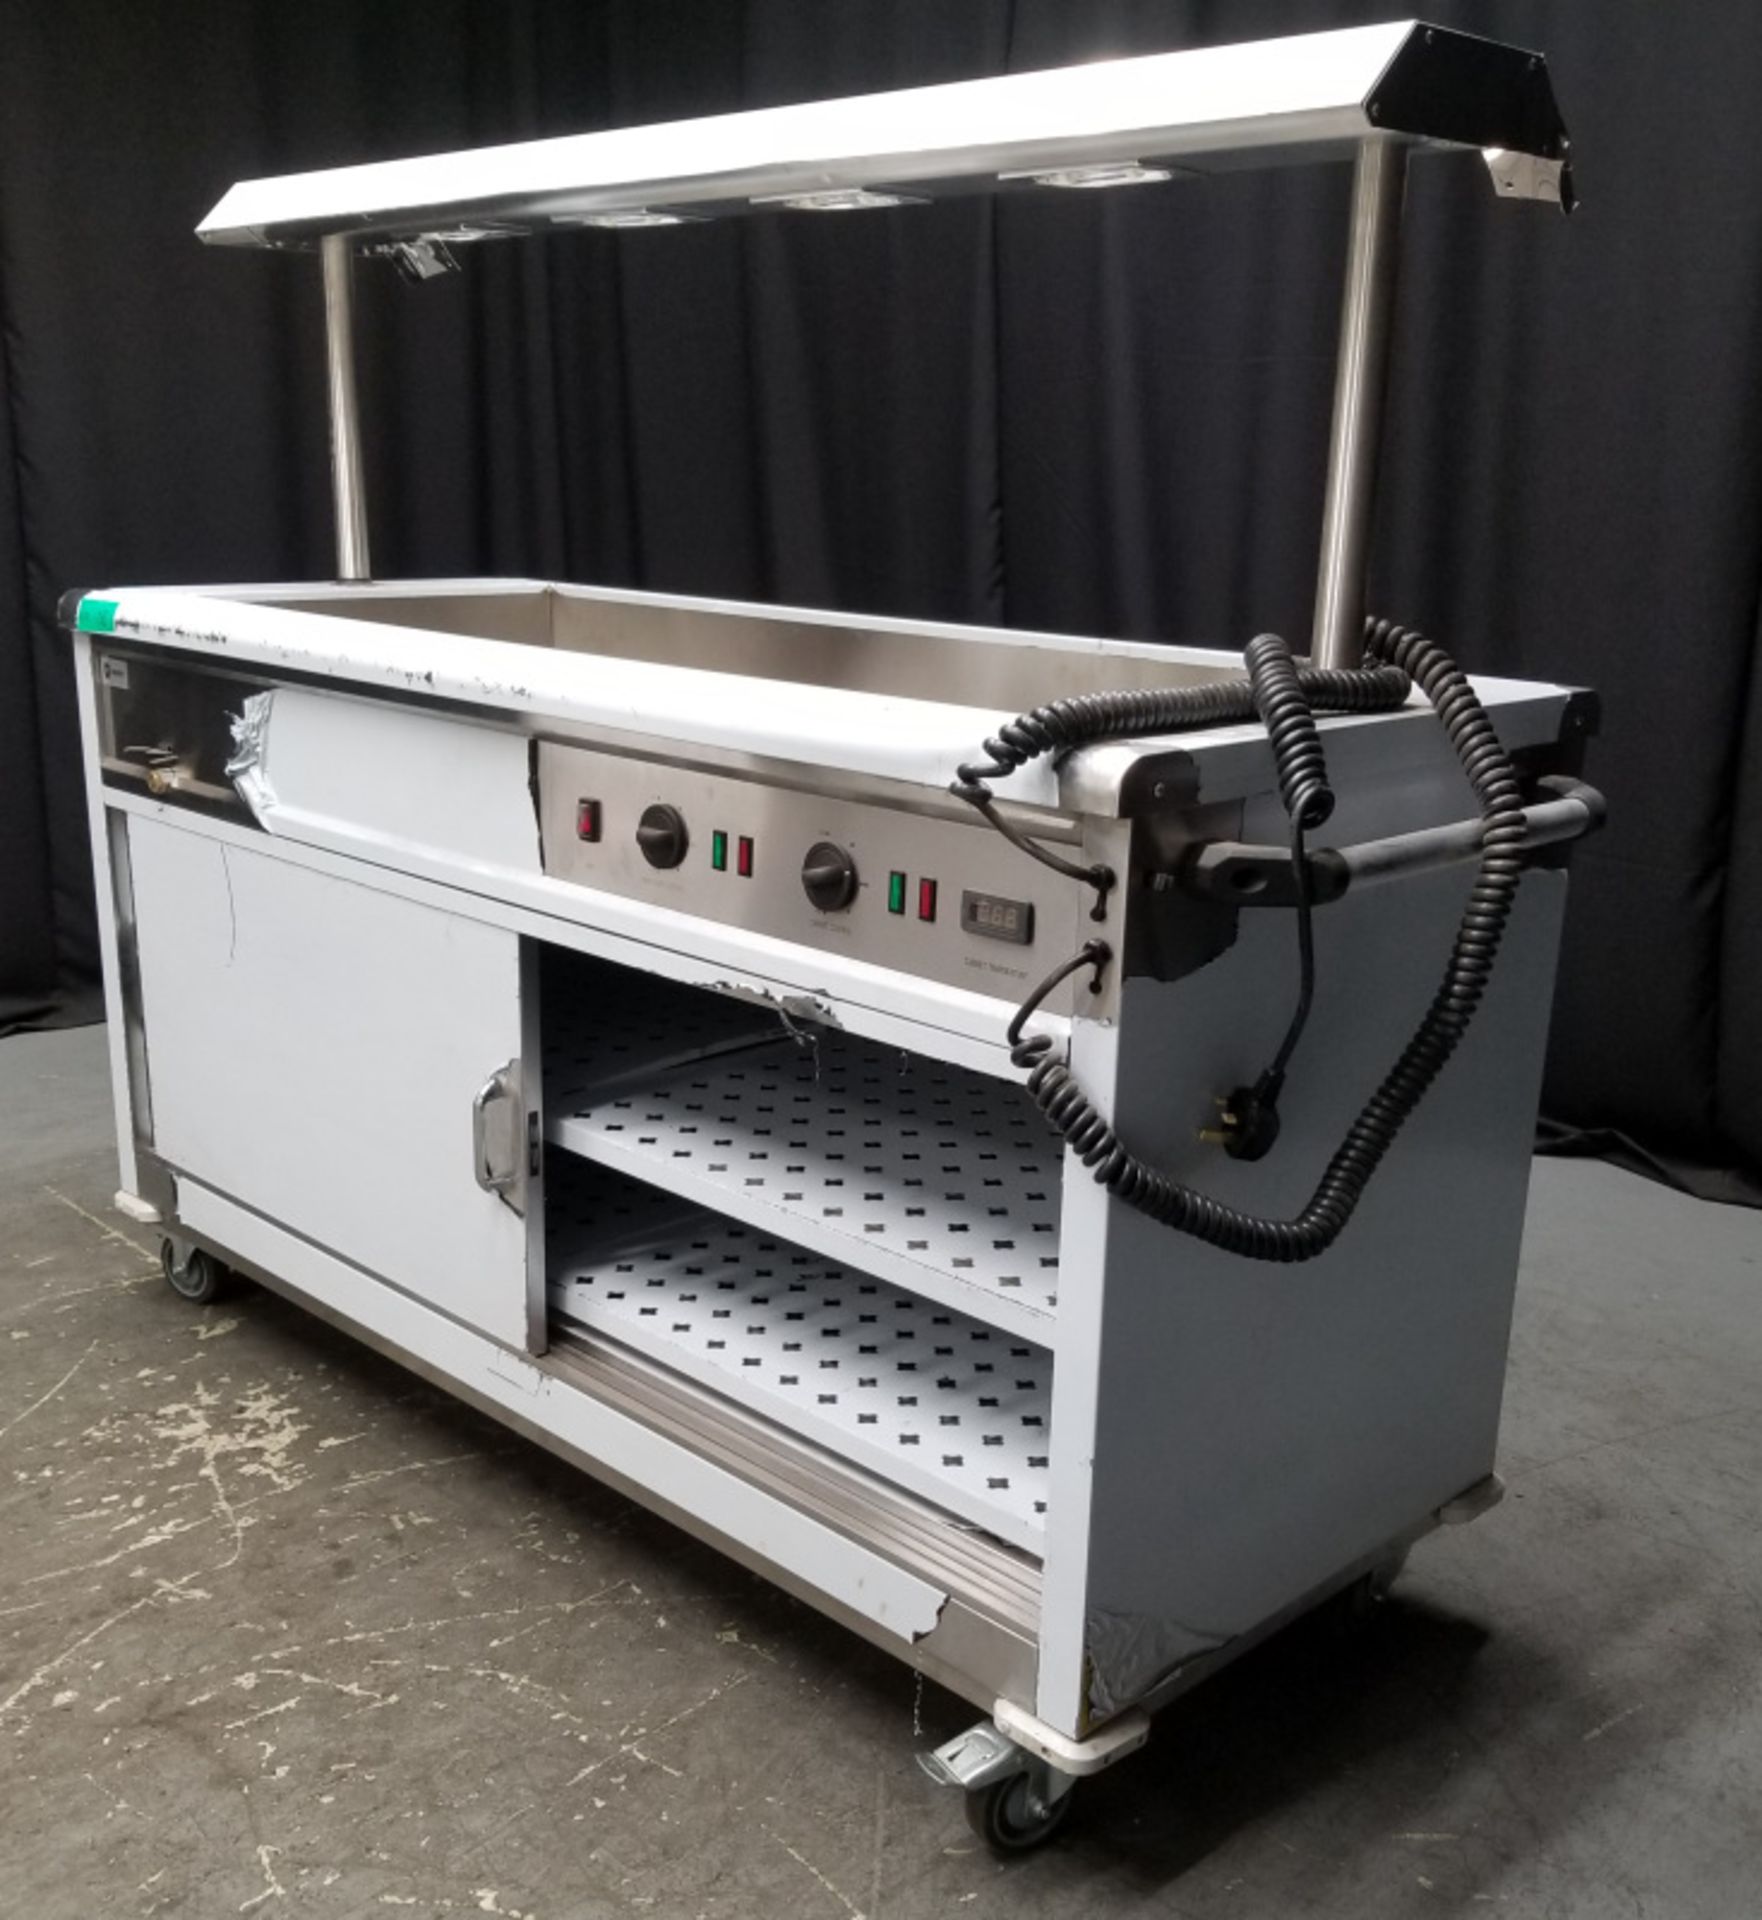 Parry Mobile Bain Marie Servery with Light Unit - Model MSB15G Serial No.170360050 -L1630m - Image 17 of 23